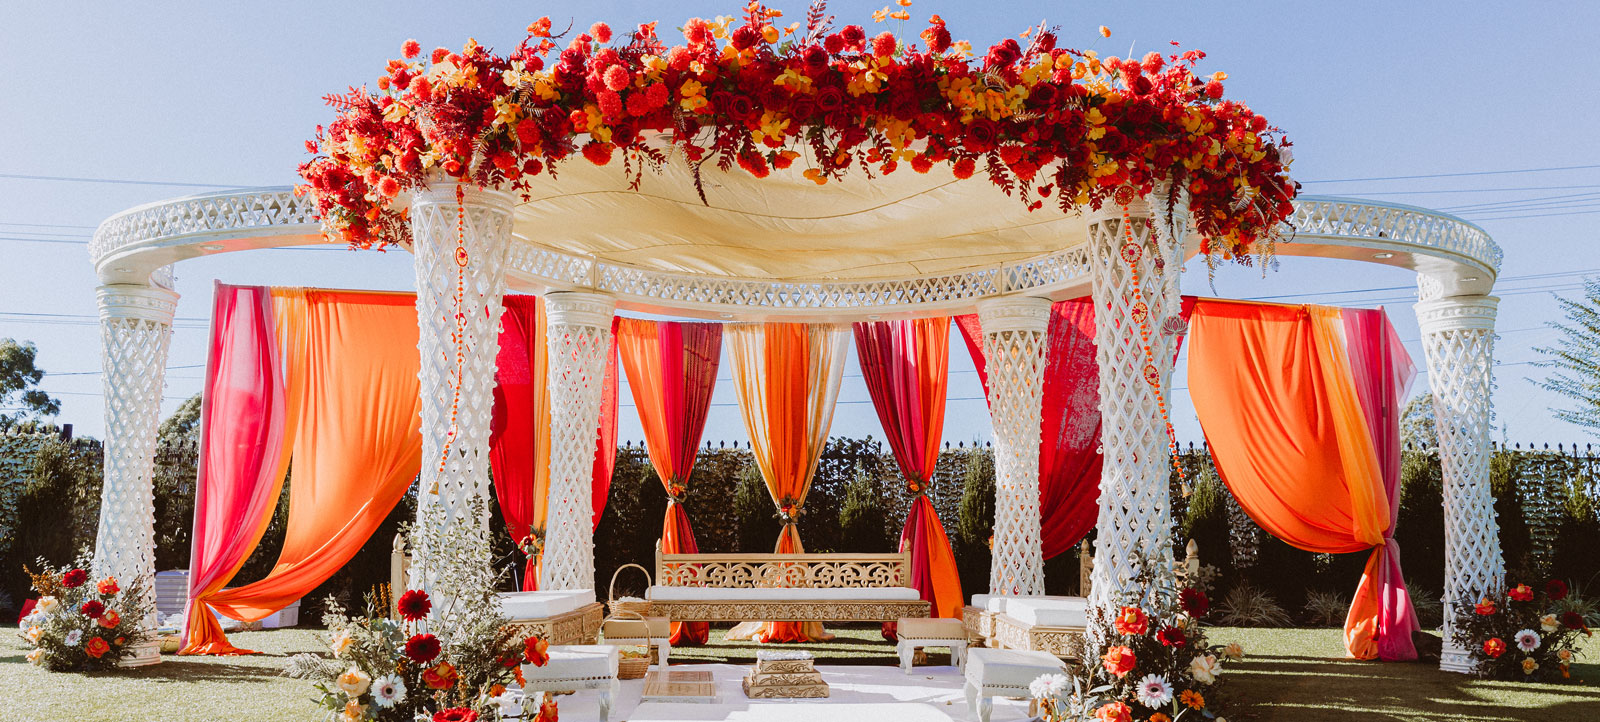 Indian wedding decoration ideas you wish you knew before!